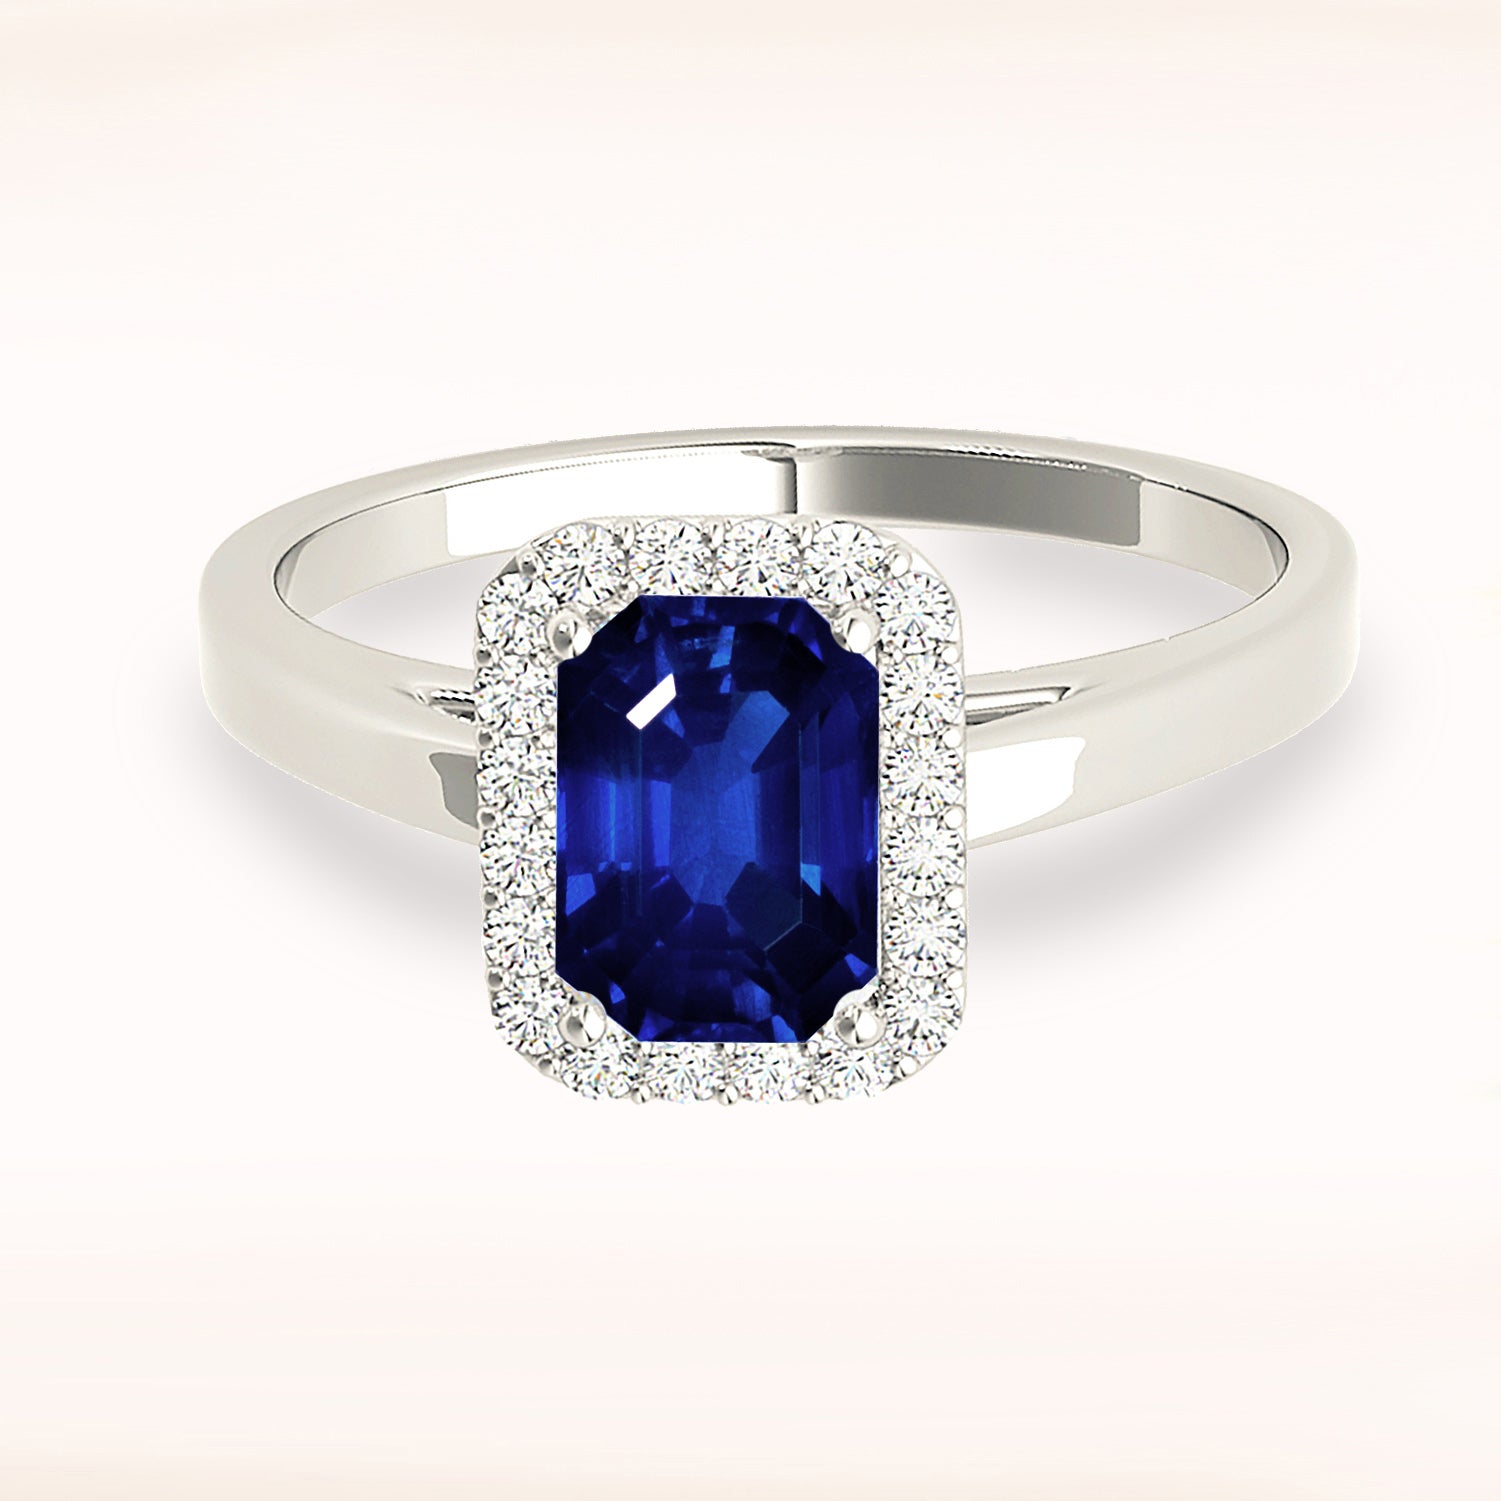 1.15 ct. Genuine Blue Emerald Cut Sapphire Ring With 0.20 ctw. Diamond Halo, Solid Gold Band | Natural Sapphire And Diamond Gemstone Ring-in 14K/18K White, Yellow, Rose Gold and Platinum - Christmas Jewelry Gift -VIRABYANI